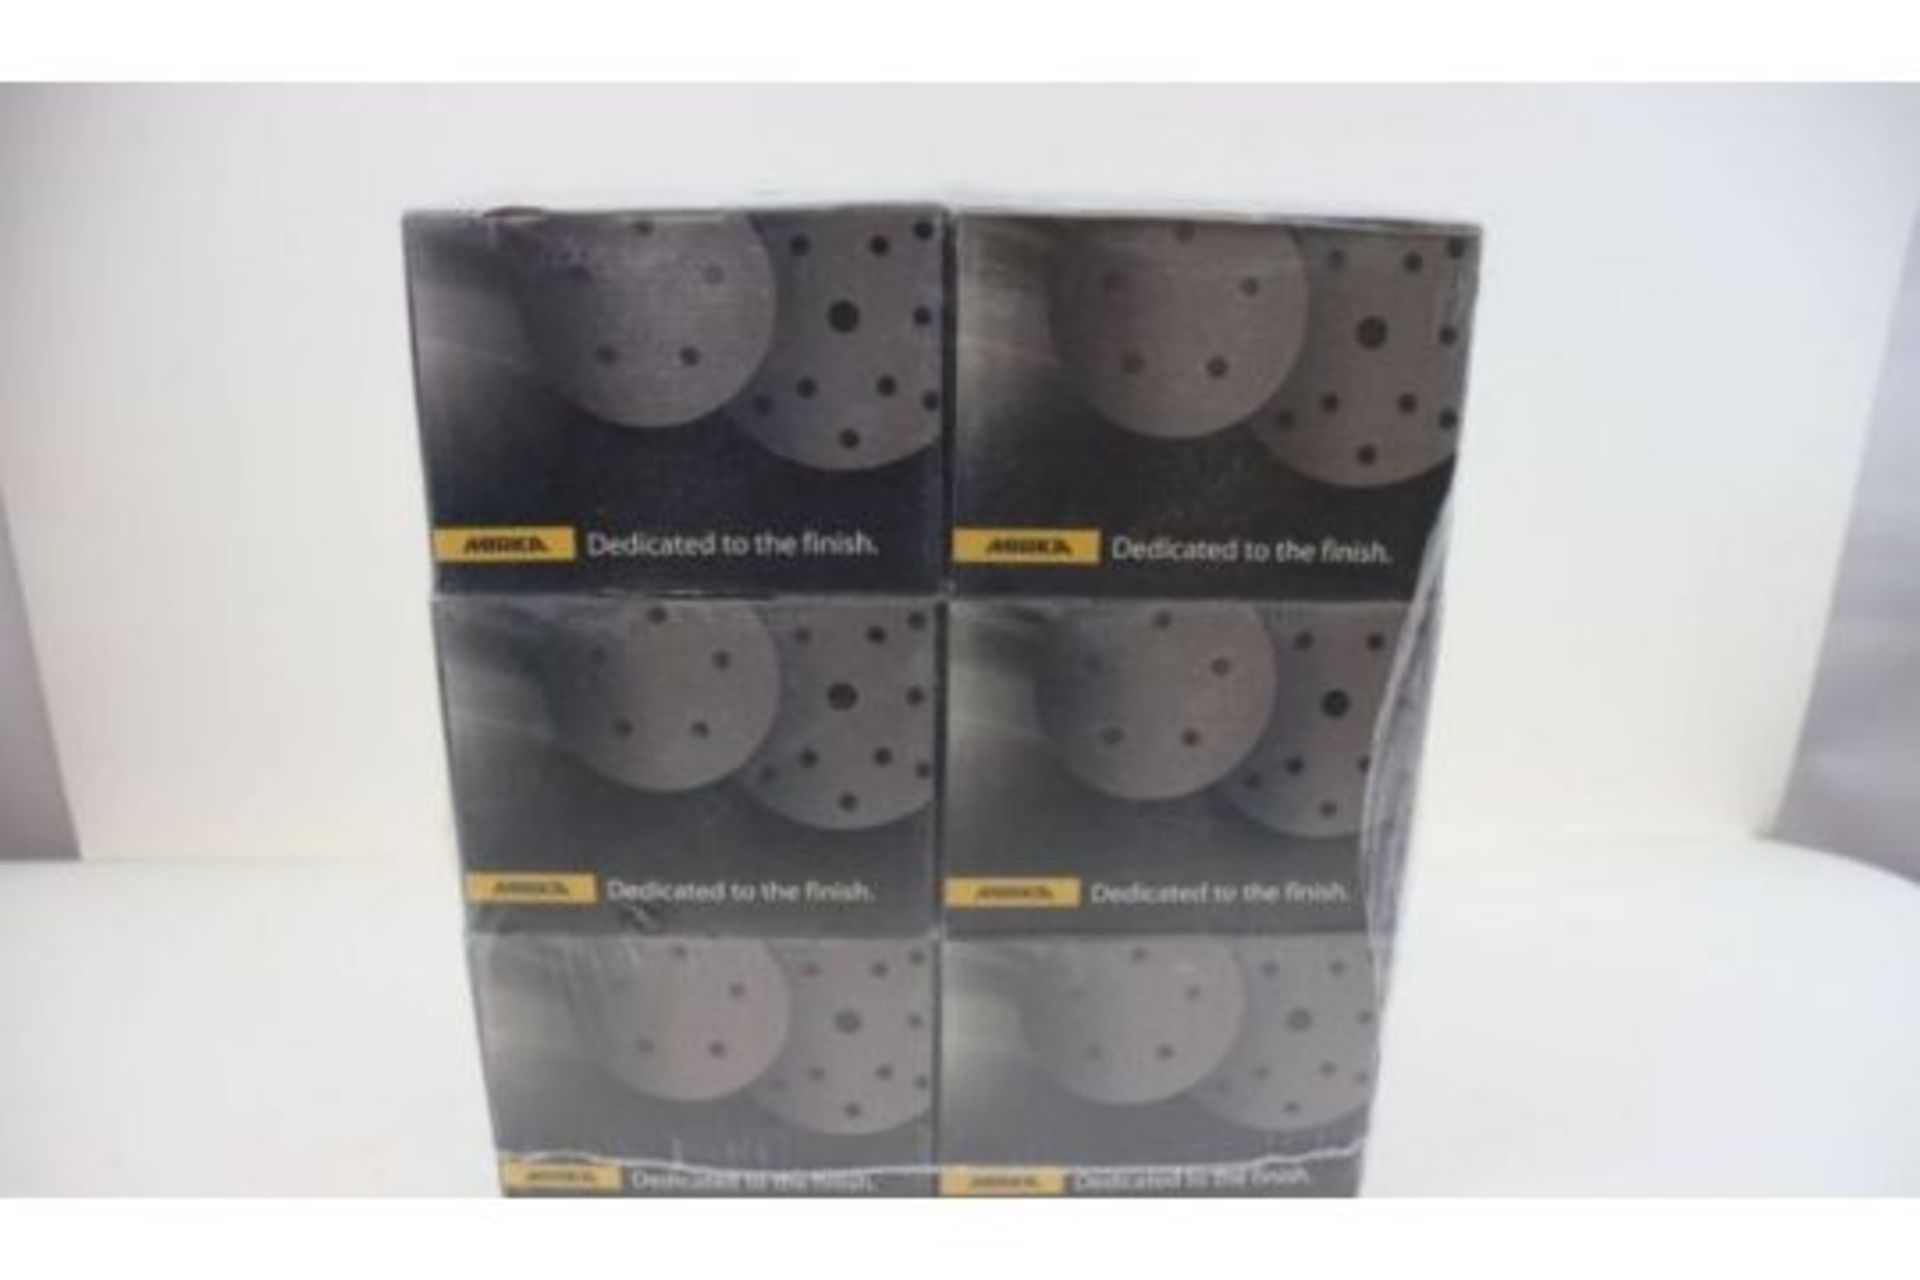 Six Boxes of 100 Mirka Basecut Velcr 17 Hole Sanding Discs 6 inch 150mm P120 Grit - Image 3 of 3